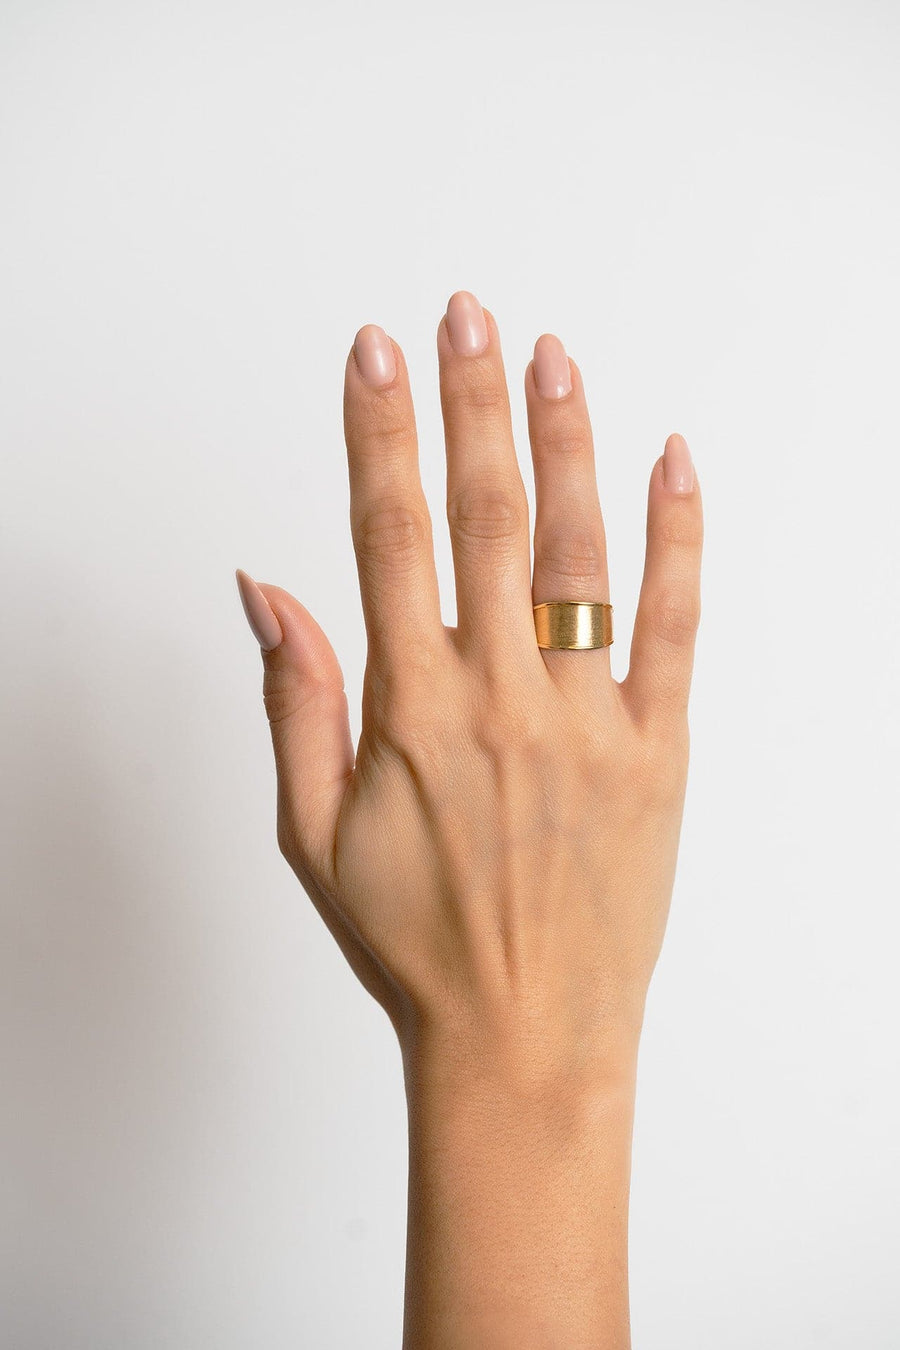 Marco Bicego® 'Lunaria' 18K Yellow Gold Ring - Skeie's Jewelers